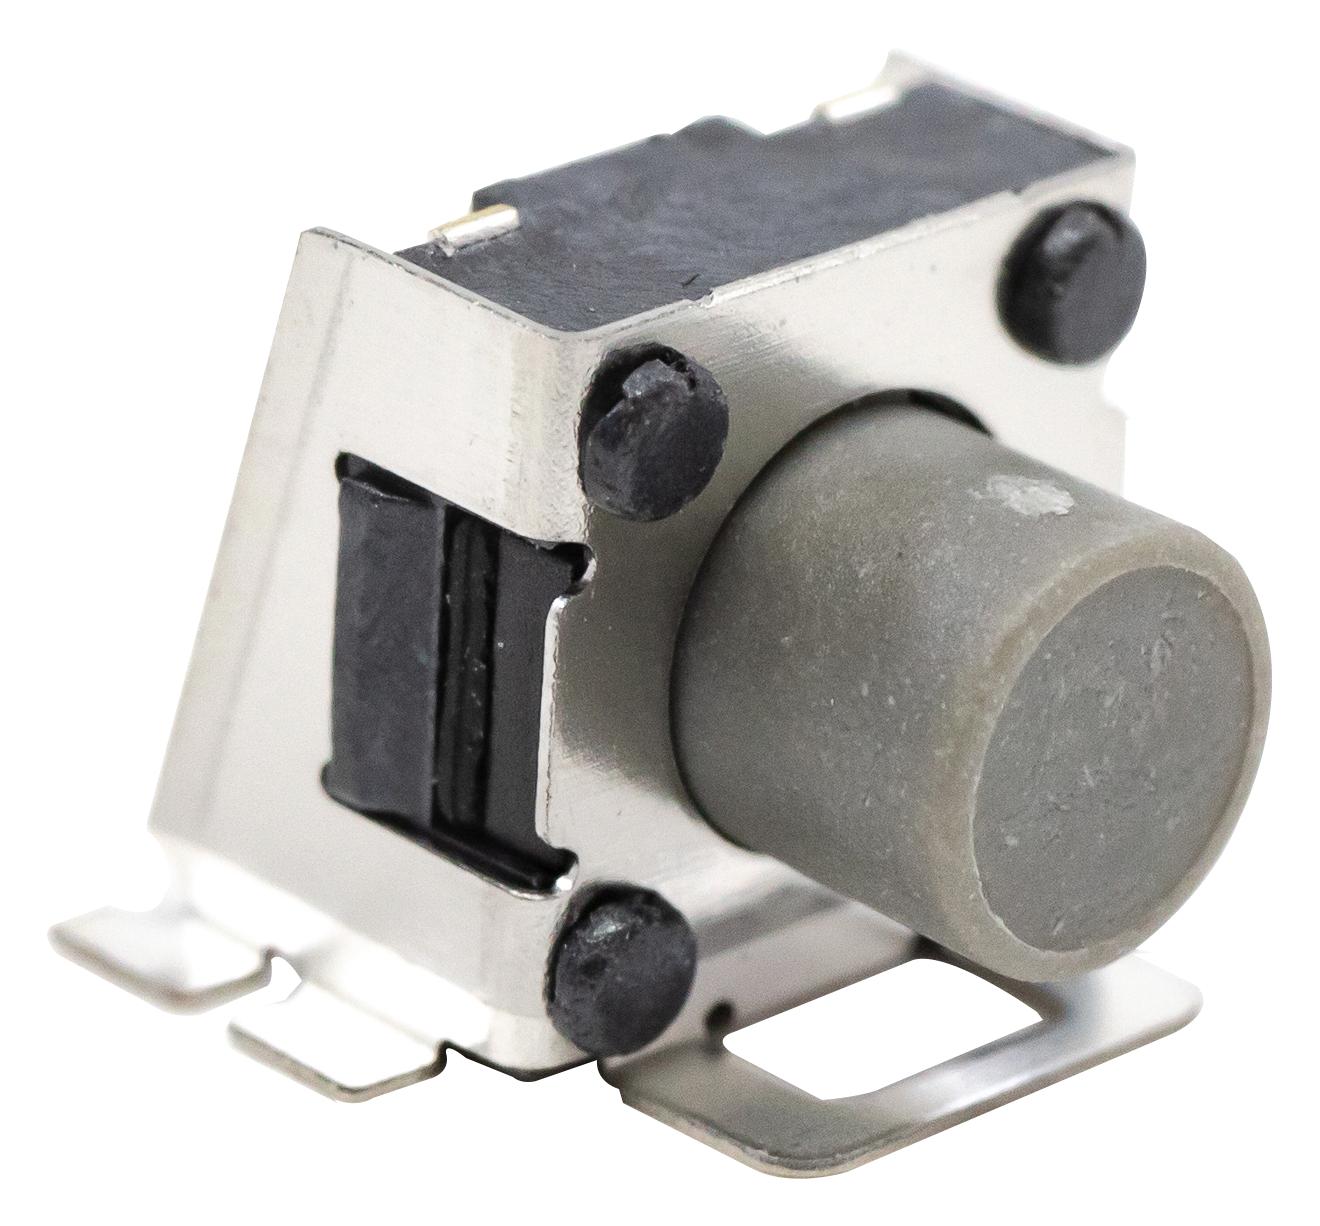 E-Switch Tl3360Bf185Q Tactile Switch, 0.05A, 12Vdc, 185Gf, Smd